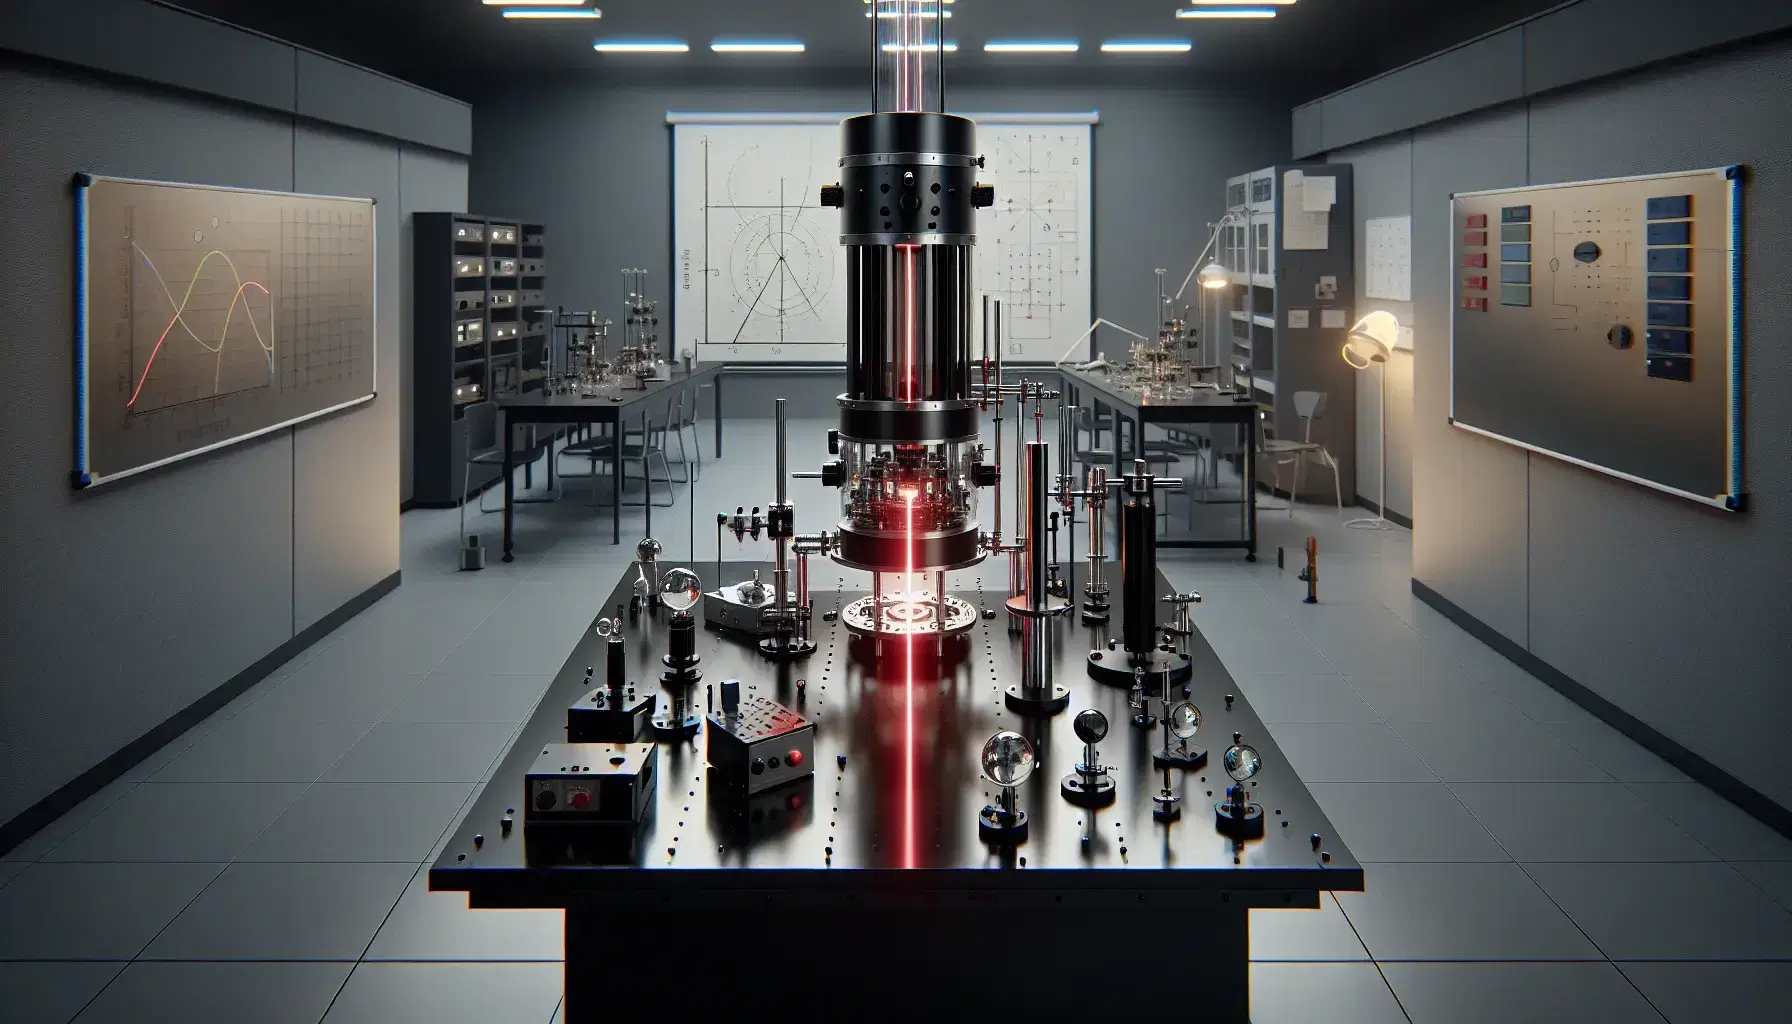 Modern physics laboratory with an optical table setup, including laser housings, mirror mounts, prisms, and a visible red laser beam path.